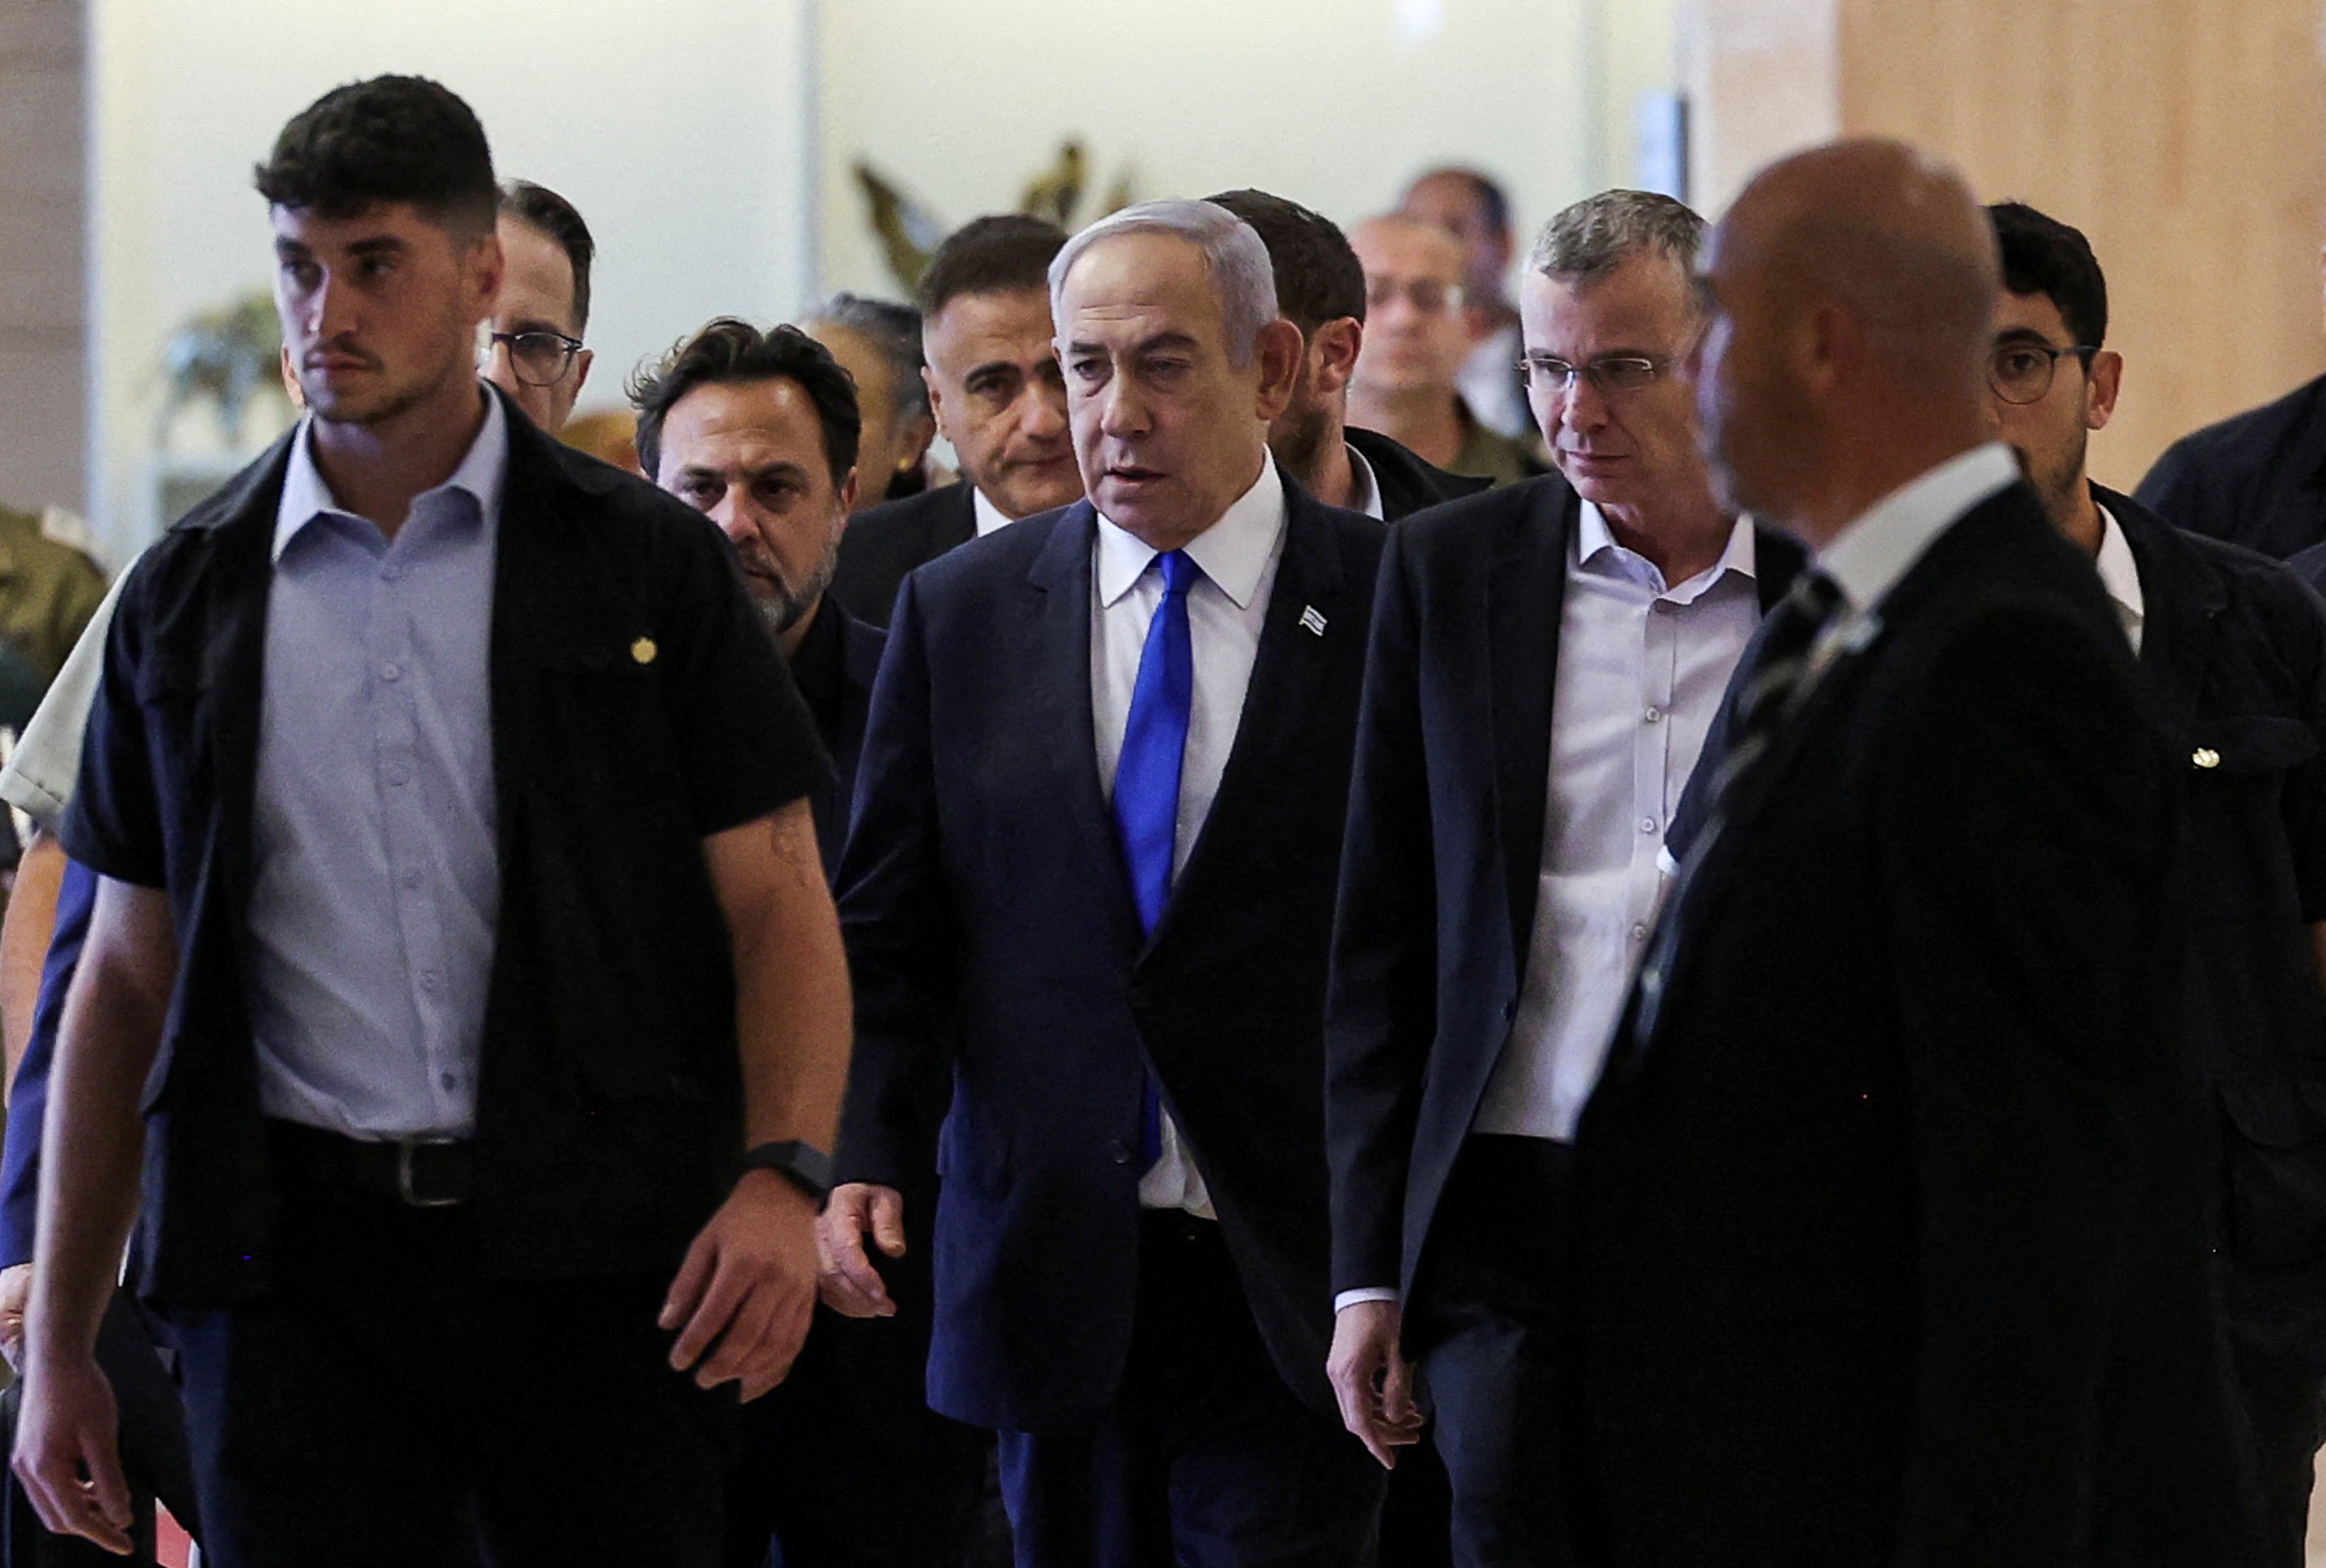 Israeli prime minister Benjamin Netanyahu arrives at his Likud party faction meeting at the Knesset, Israel’s parliament, after the ICC motion was made public